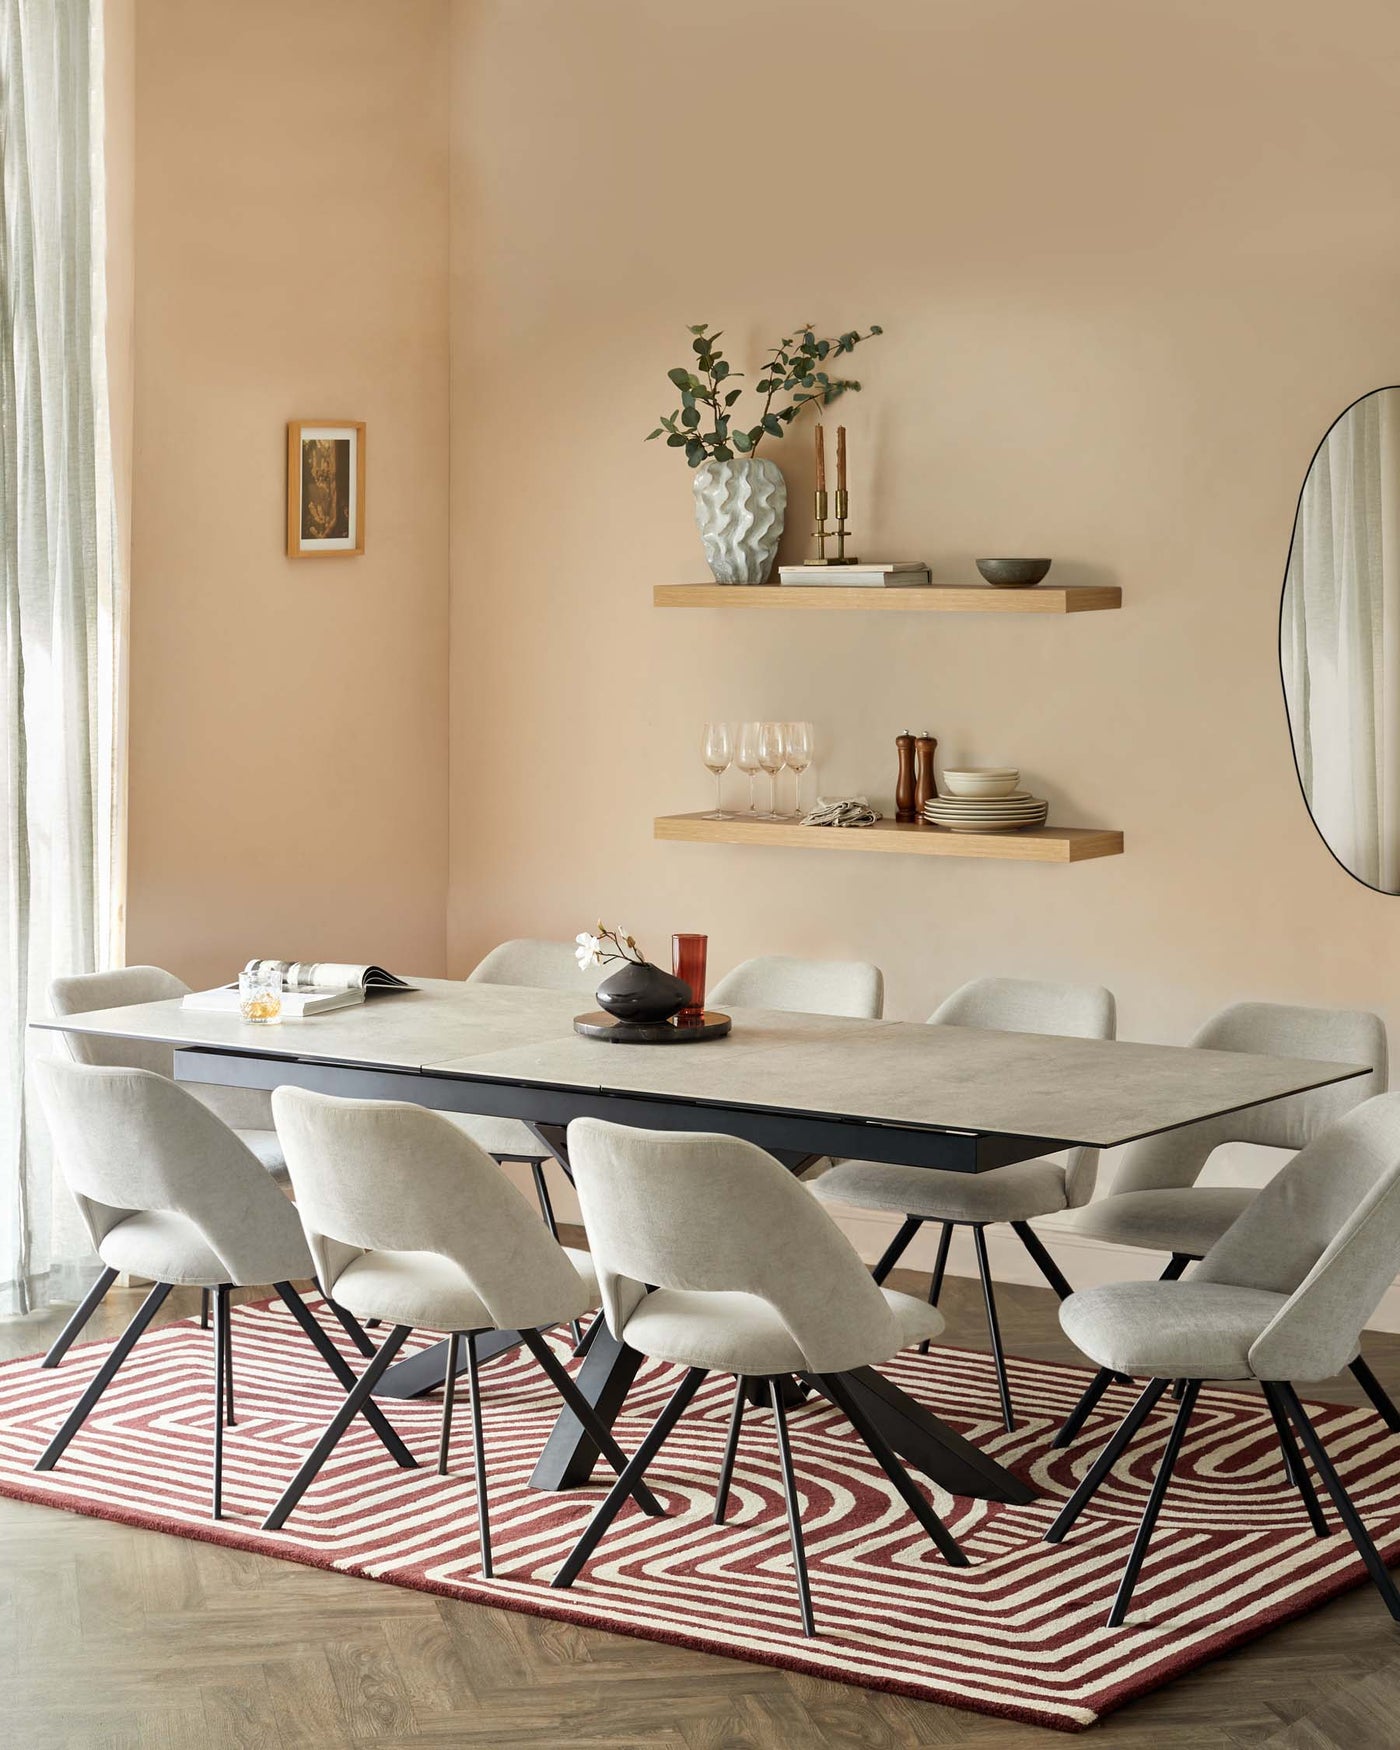 A modern dining room setting featuring a sleek, rectangular table with a dark surface and black metal legs, surrounded by six mid-century-inspired upholstered dining chairs with light grey fabric and angled black metal legs. Above the table, two natural wood floating shelves display decorative items. The dining set is anchored on a geometric red and white patterned area rug.